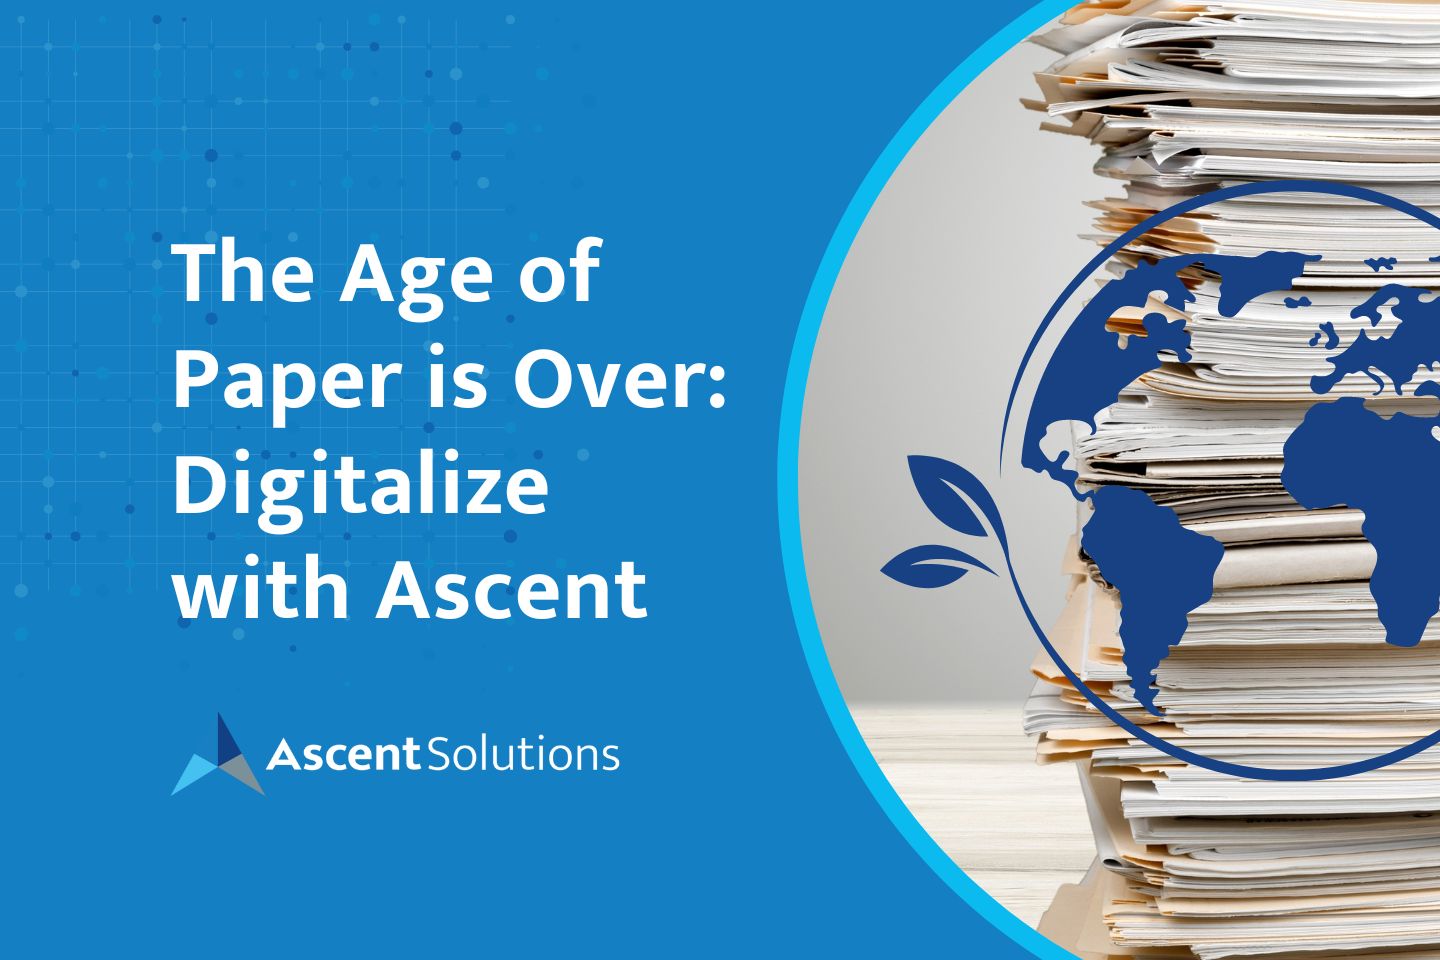 The Age of Paper is Over Digitalize with Ascent